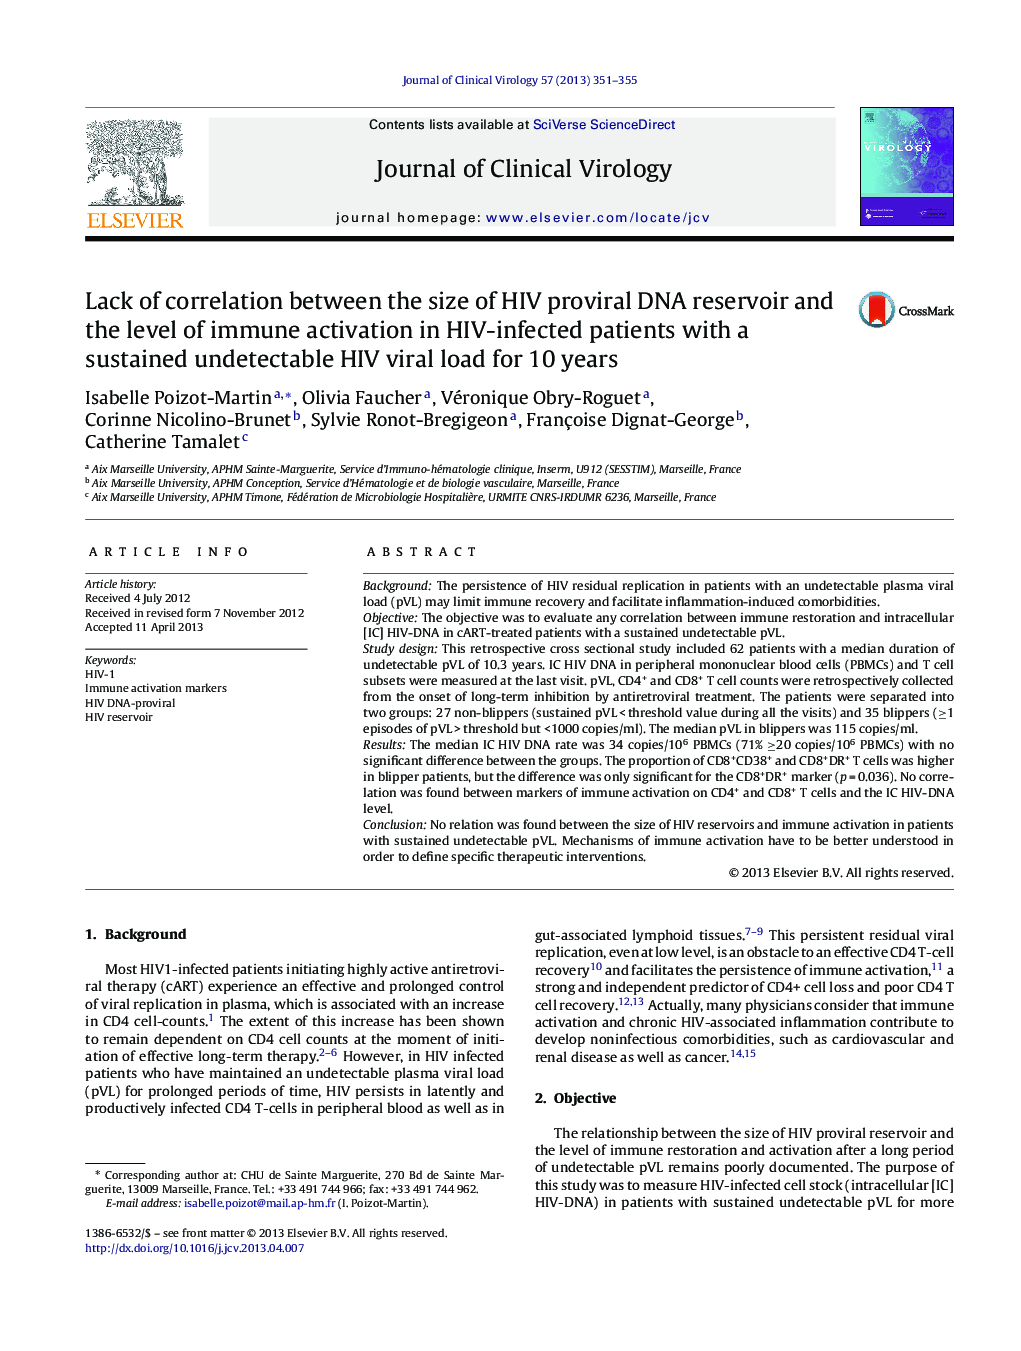 Lack of correlation between the size of HIV proviral DNA reservoir and the level of immune activation in HIV-infected patients with a sustained undetectable HIV viral load for 10 years